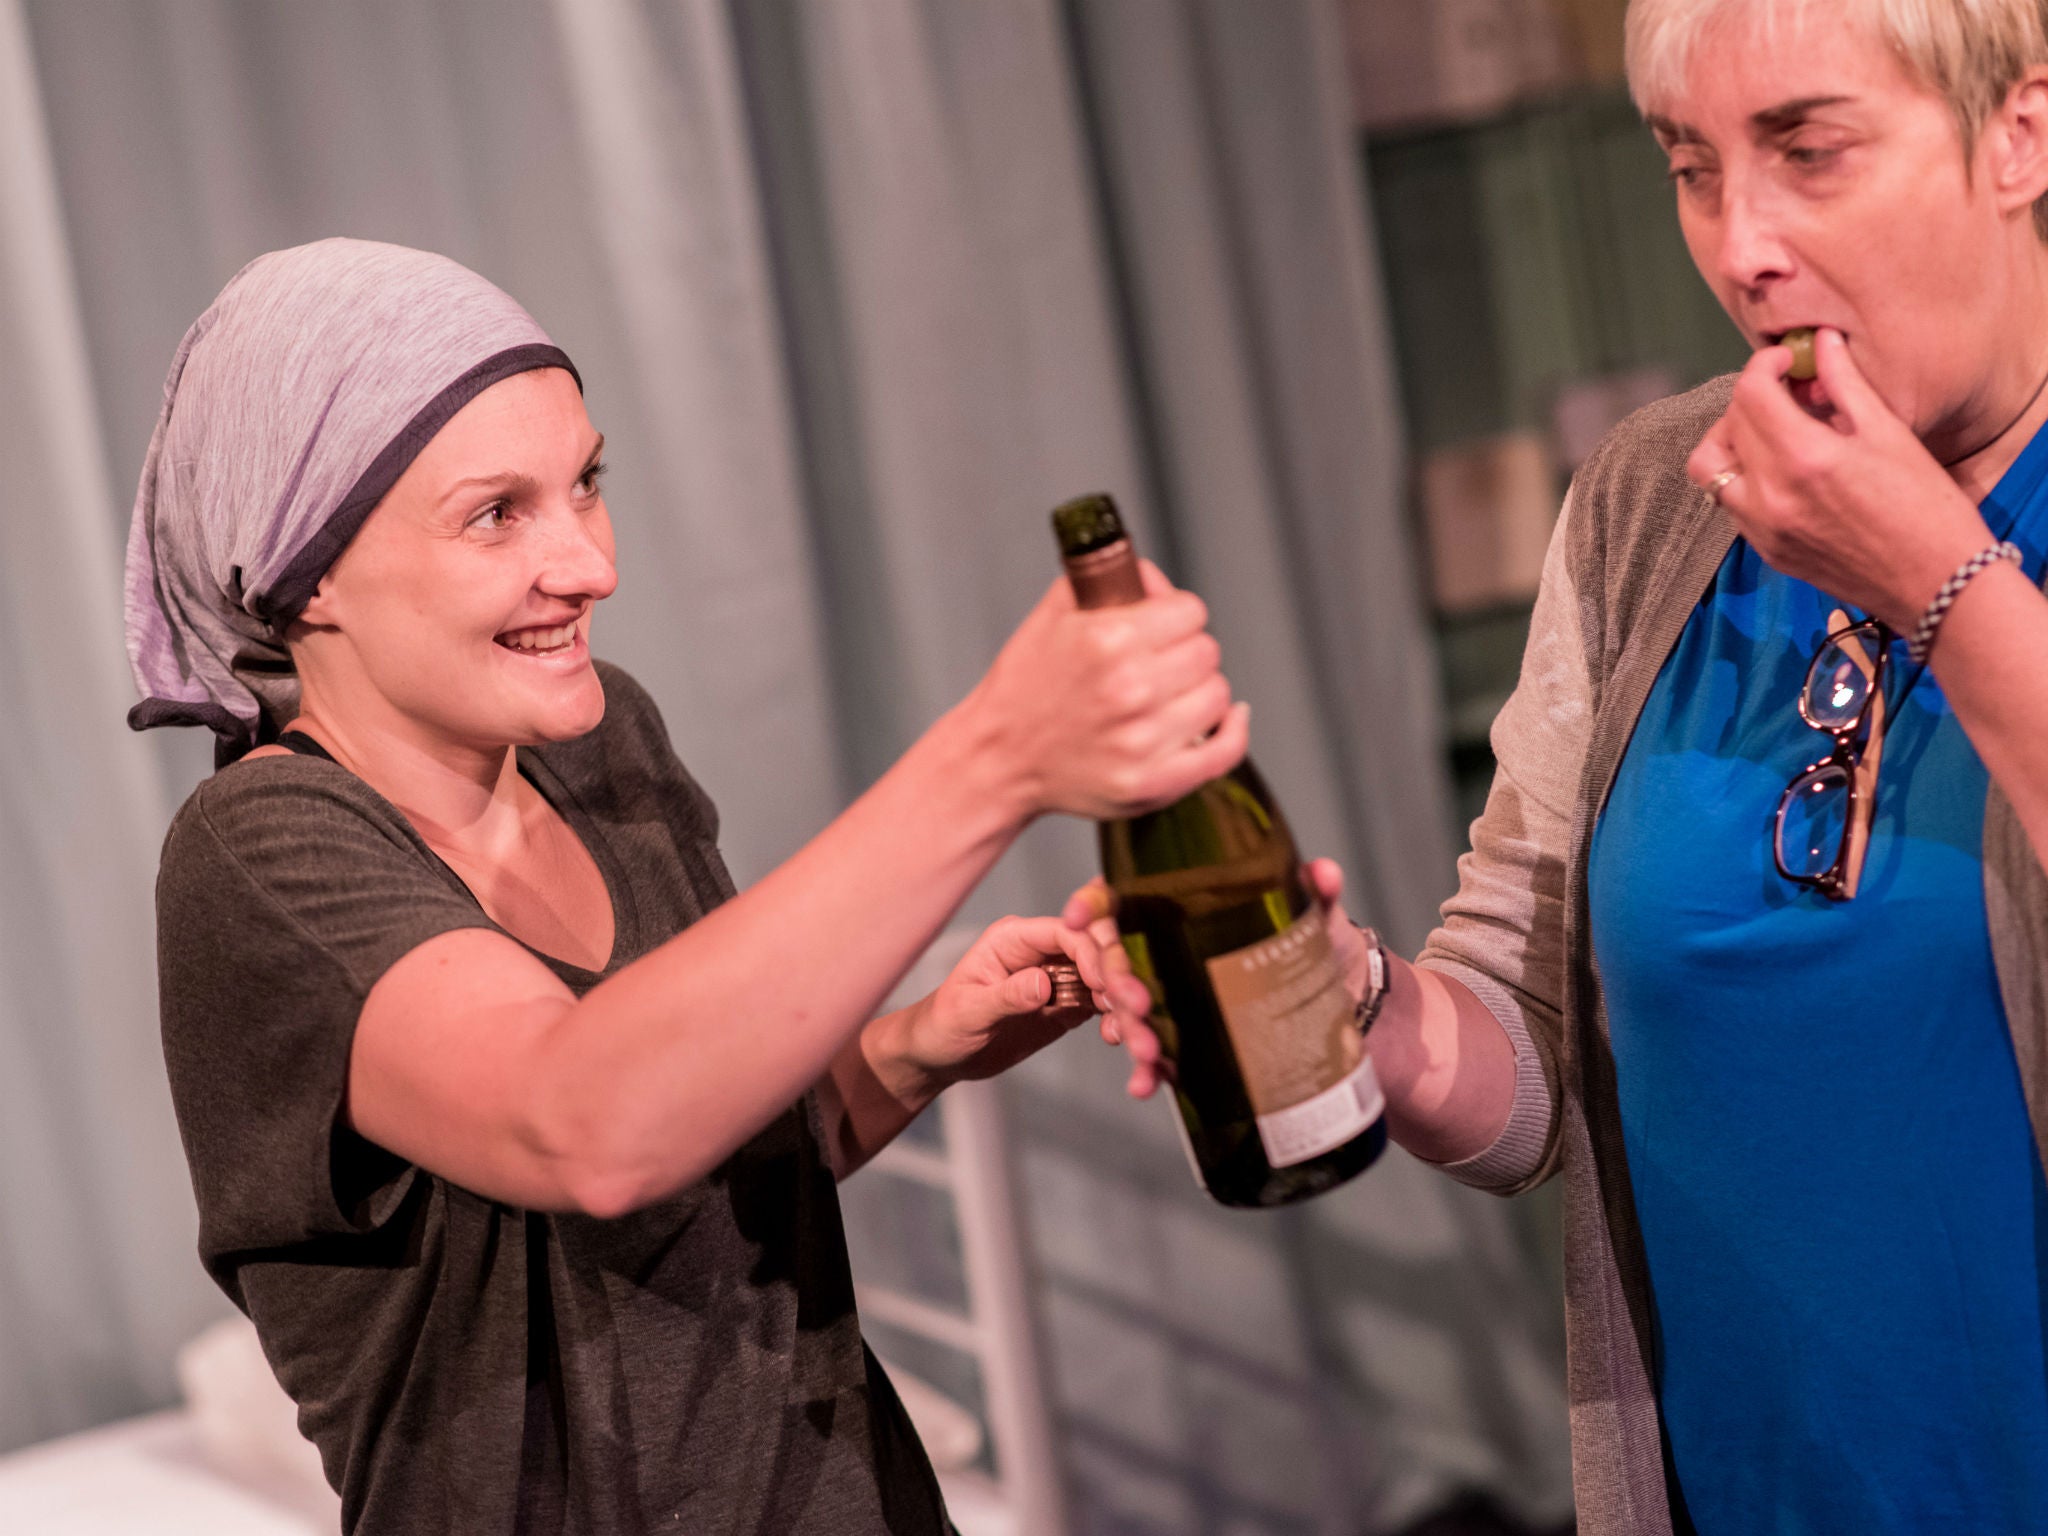 ‘All the Lights Are On’ is a slightly clunky but undeniably affecting play